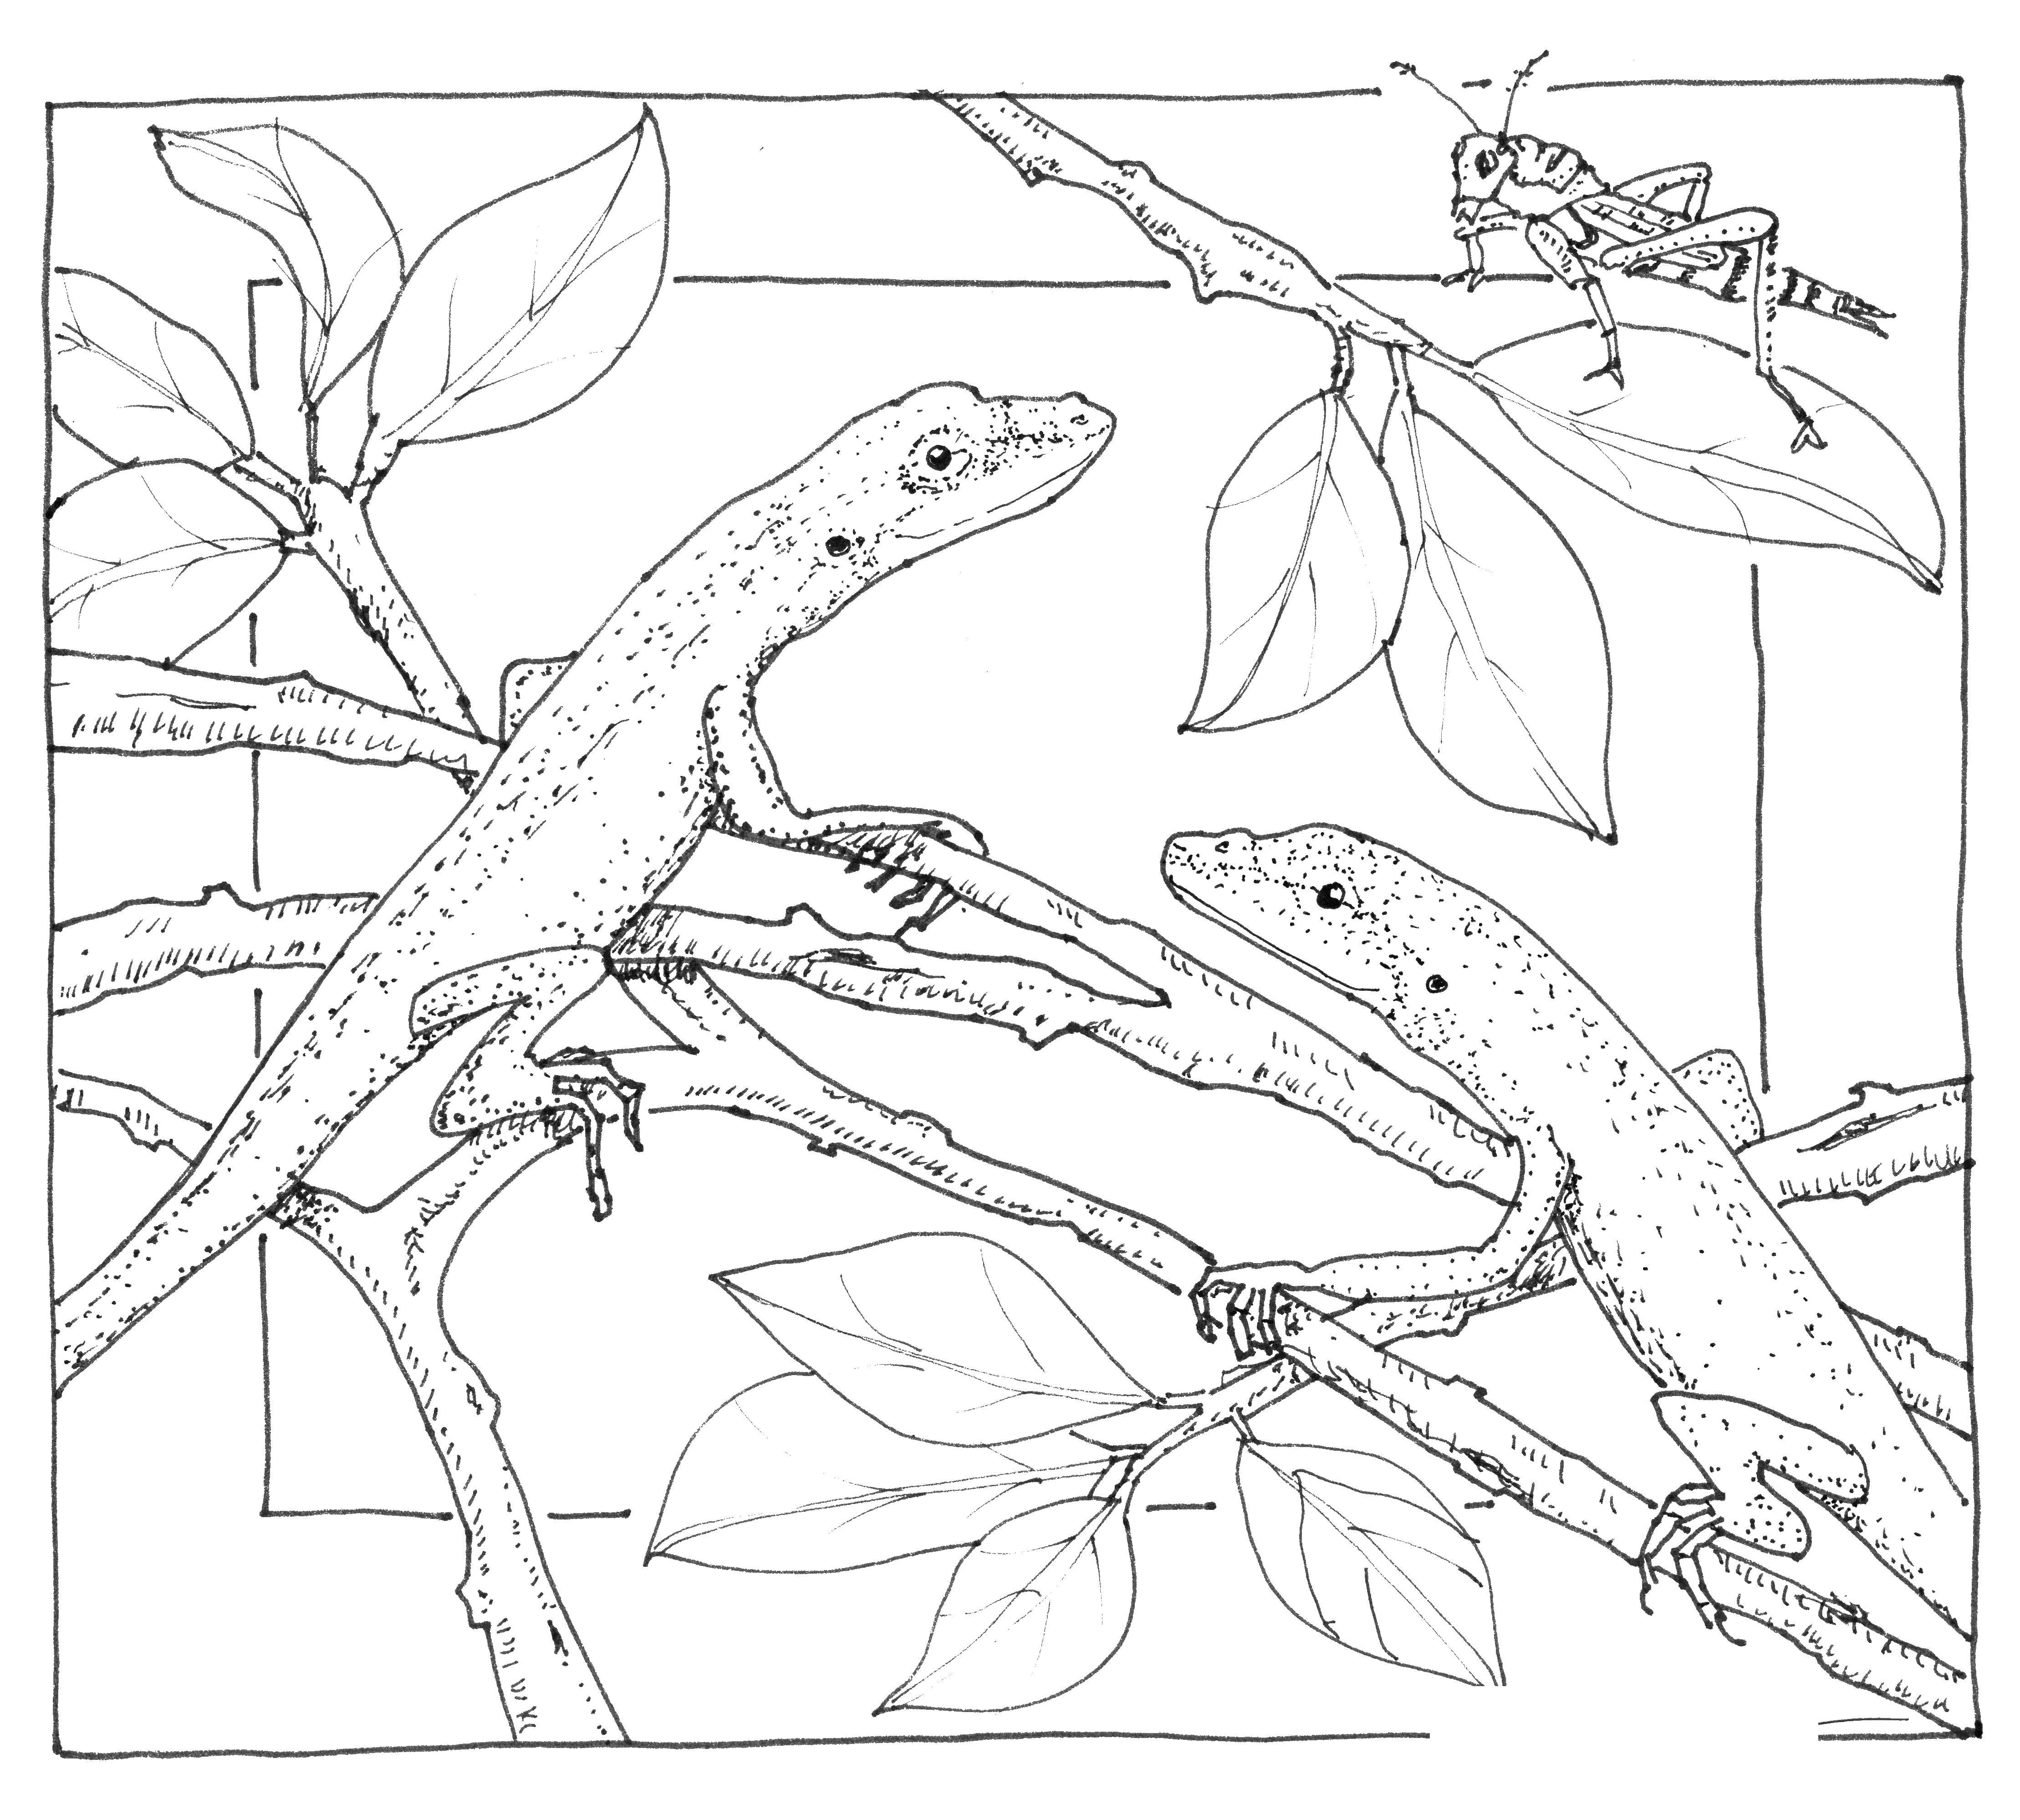 Coloring Lizards. Category Animals. Tags:  the lizard.